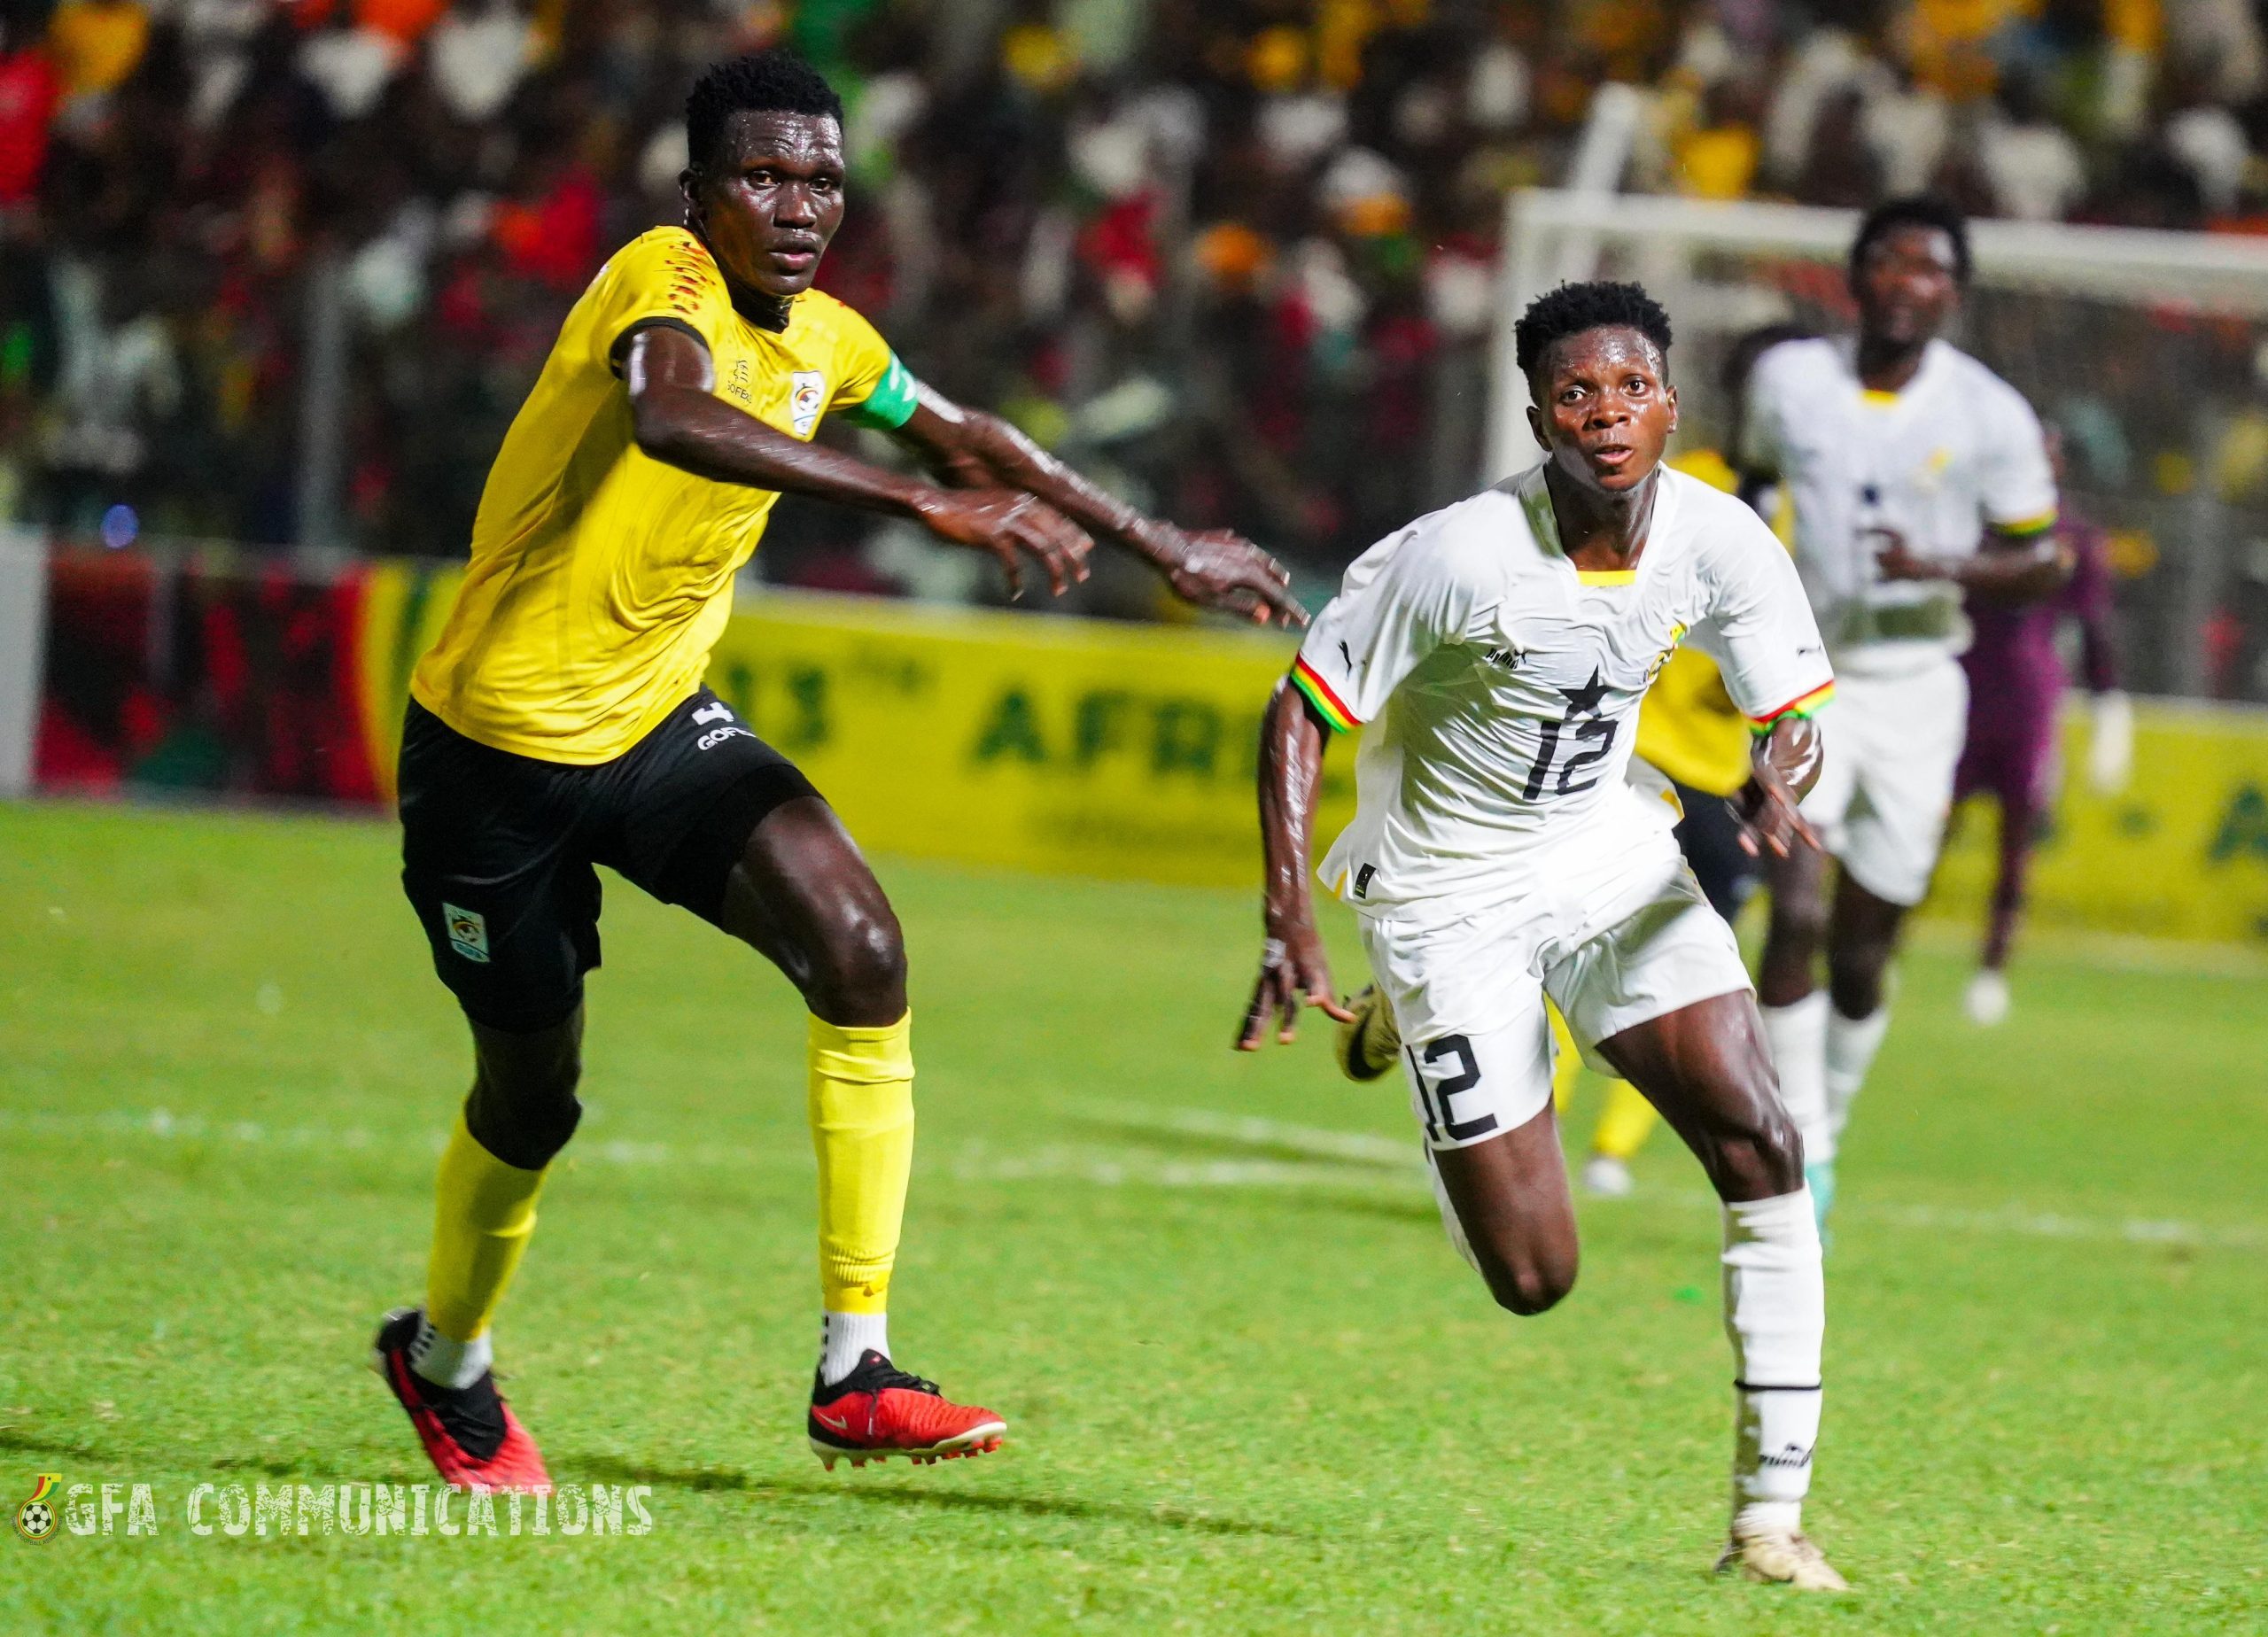 Black Satellites vs the Hippos of Uganda at the finals of the 13th African Games men's football at the Accra Sports Stadium on March 22, 2024